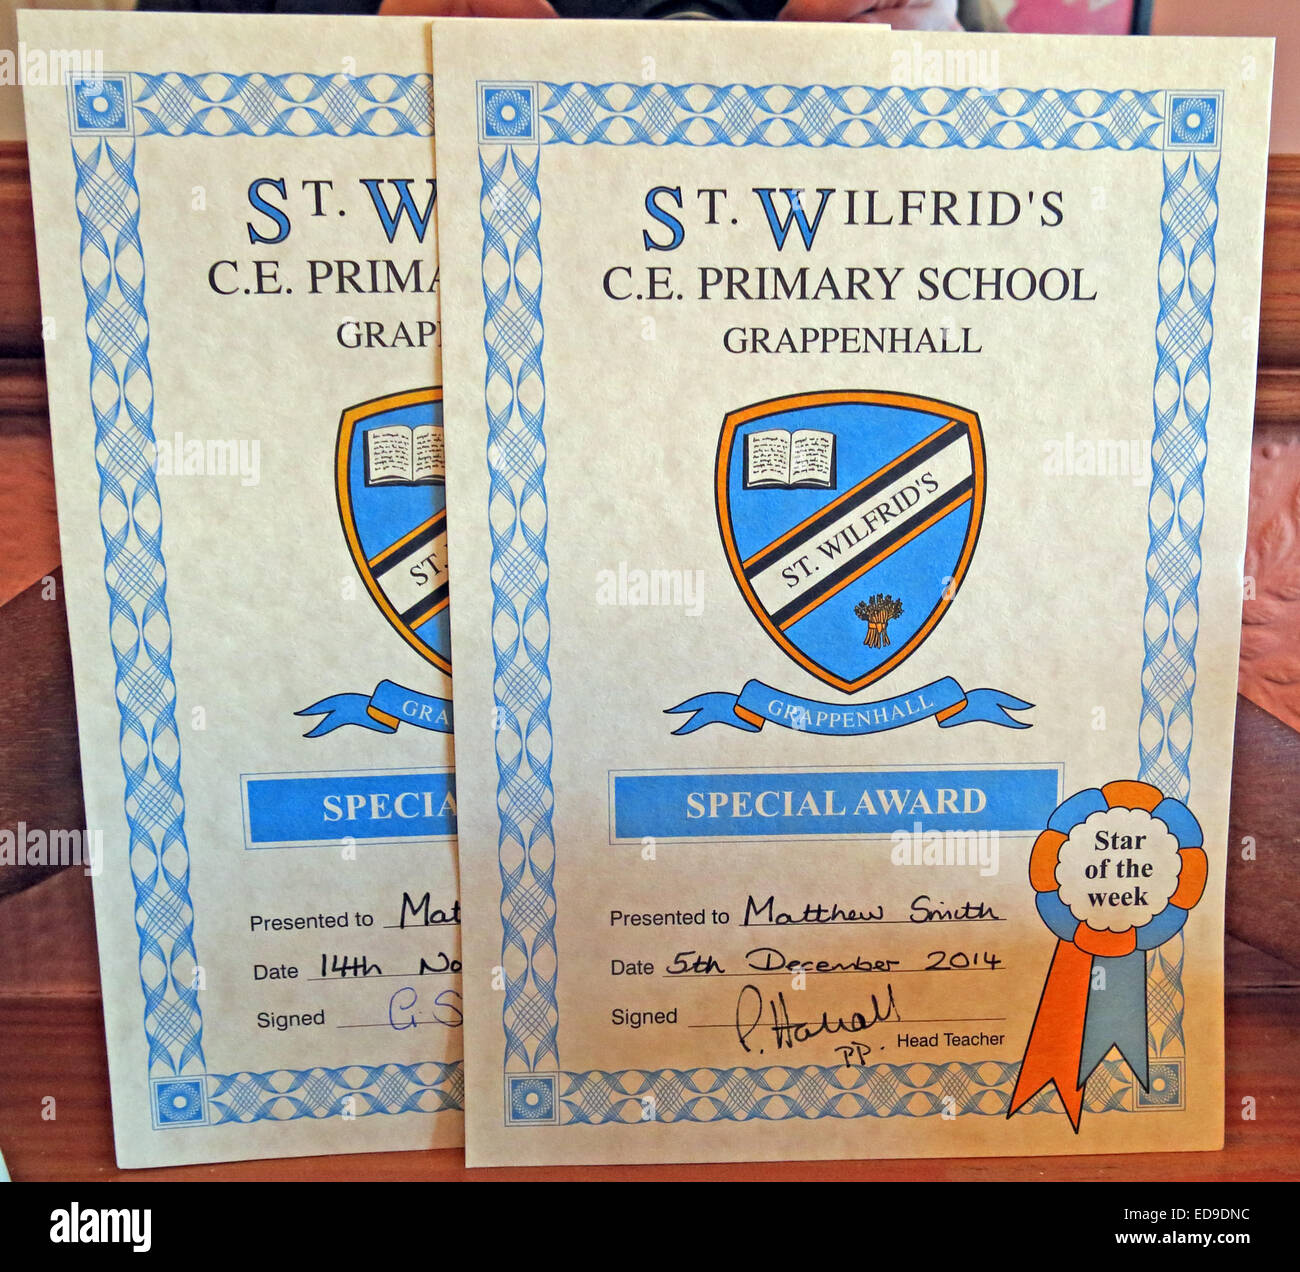 School special award certificate from primary school, St Wilfrids Grappenhall, Cheshire, England, UK Stock Photo